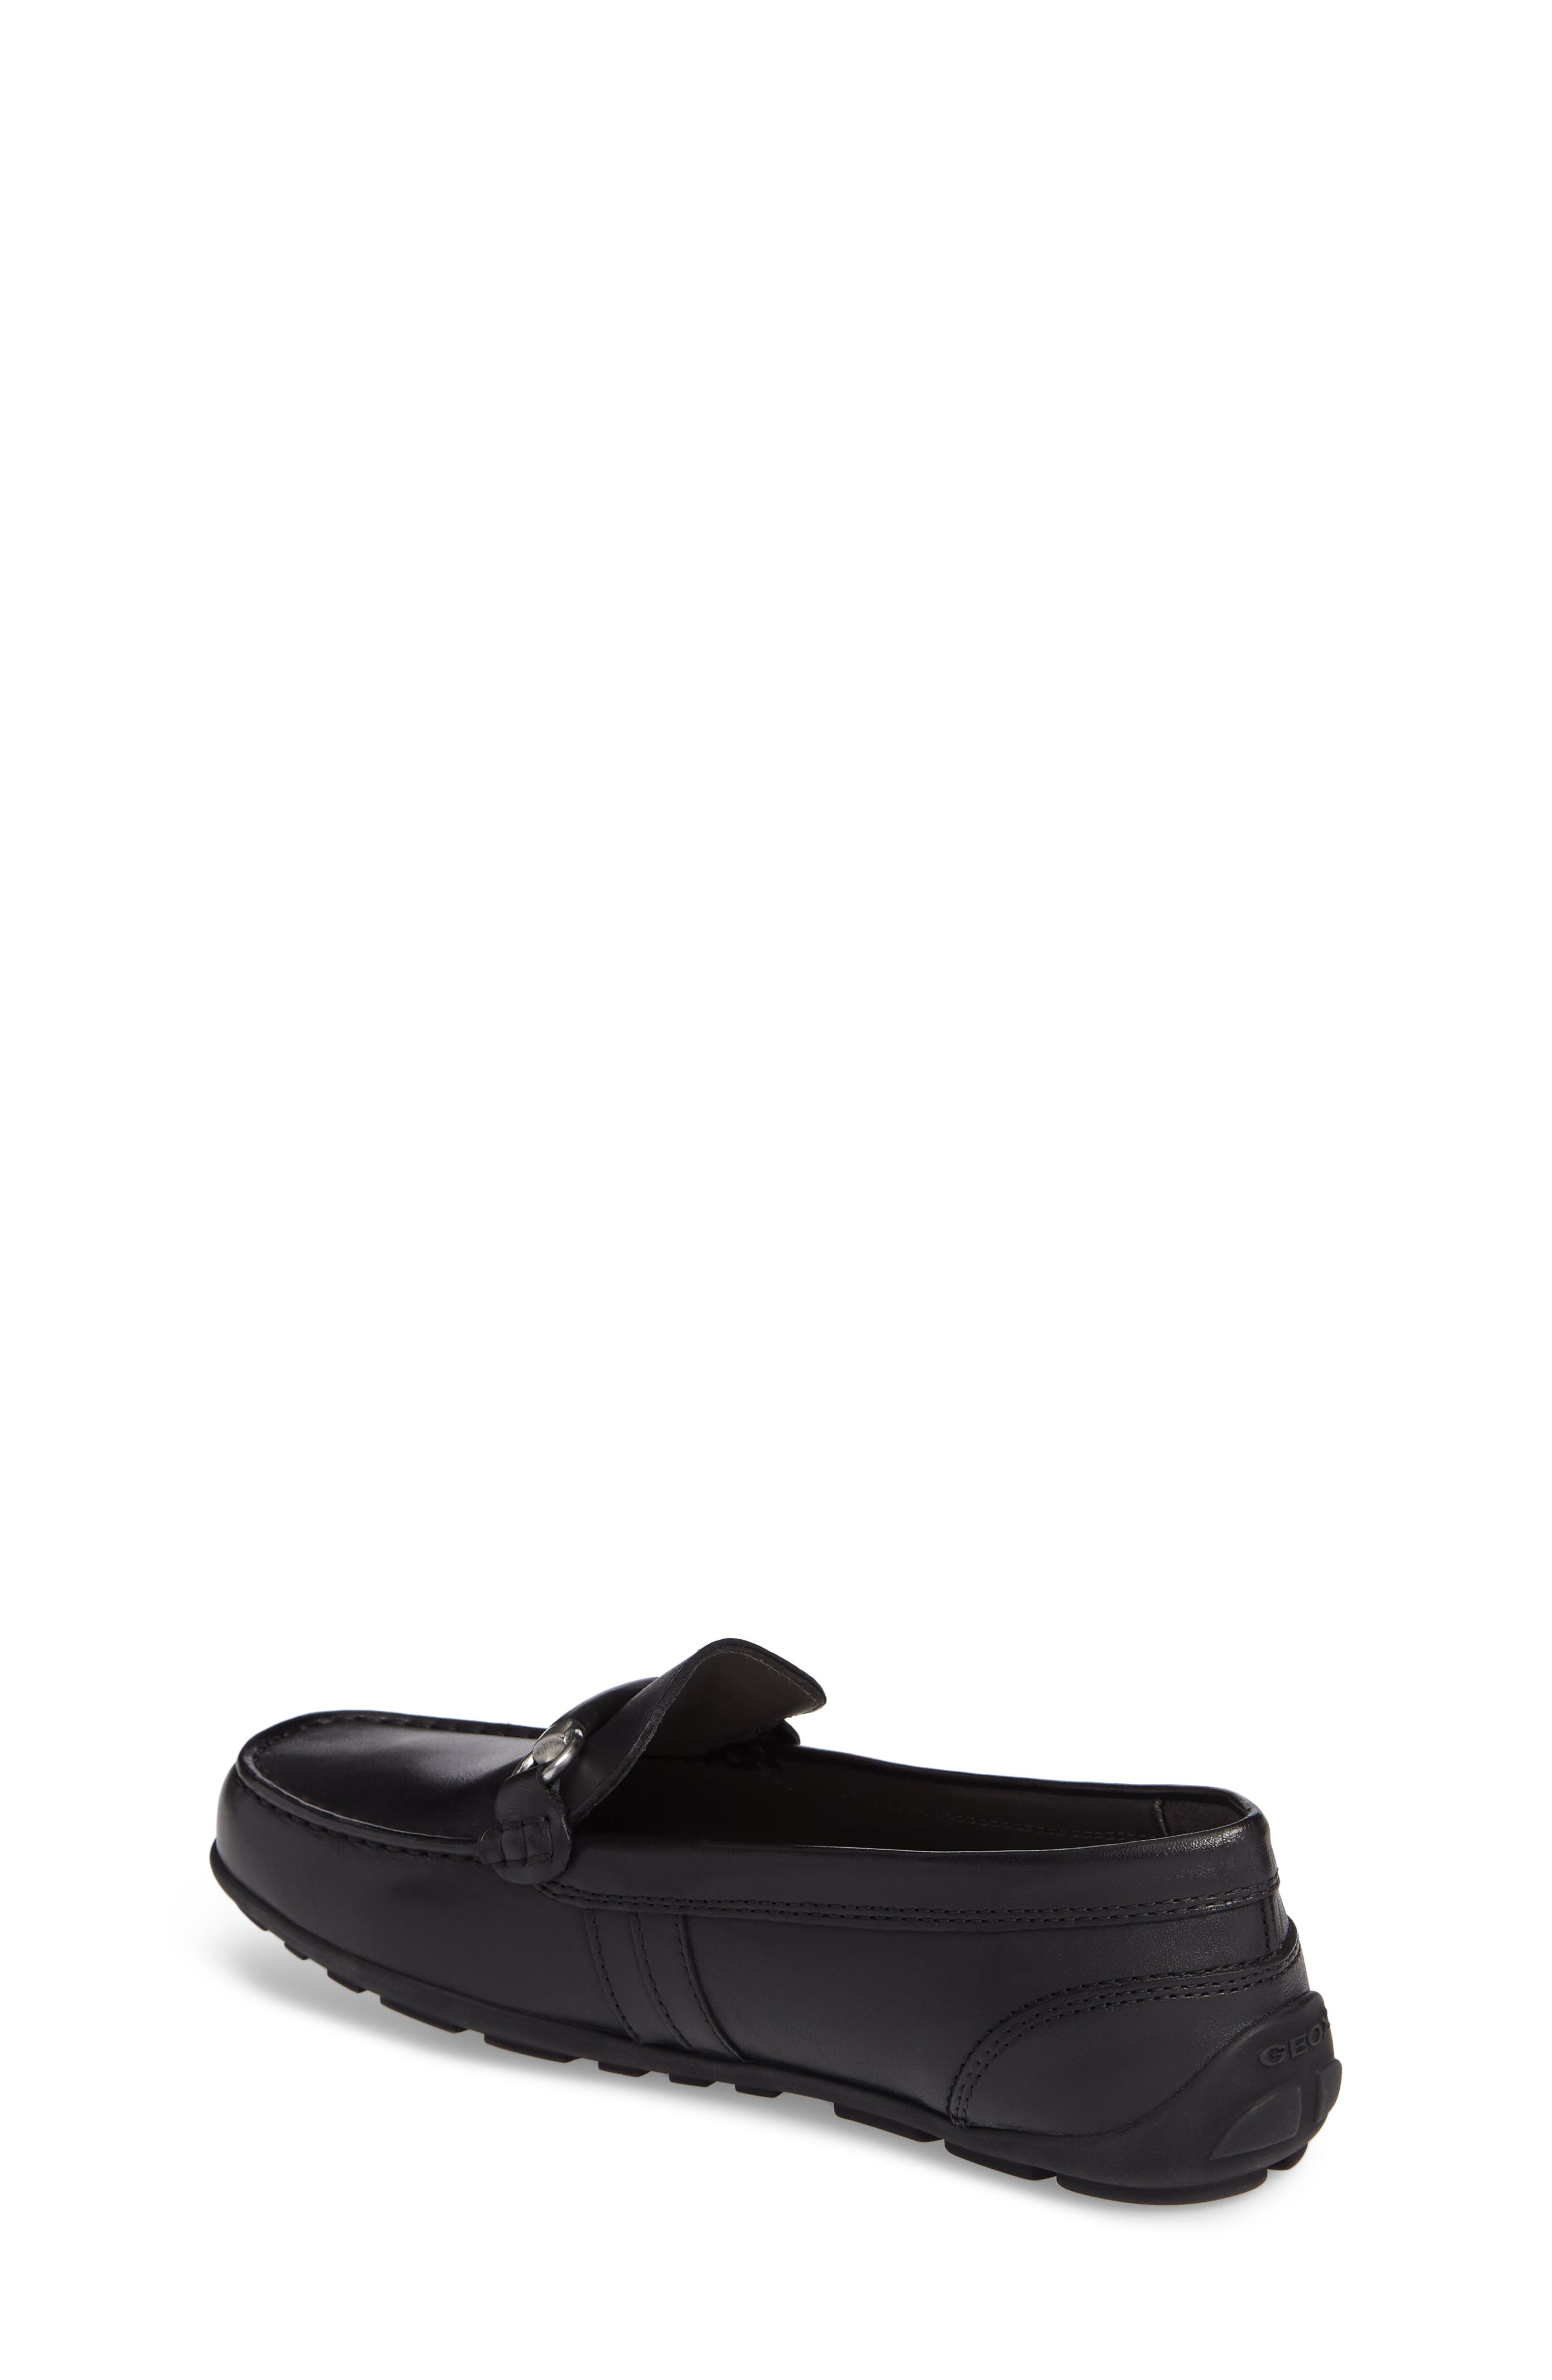 geox fast loafer